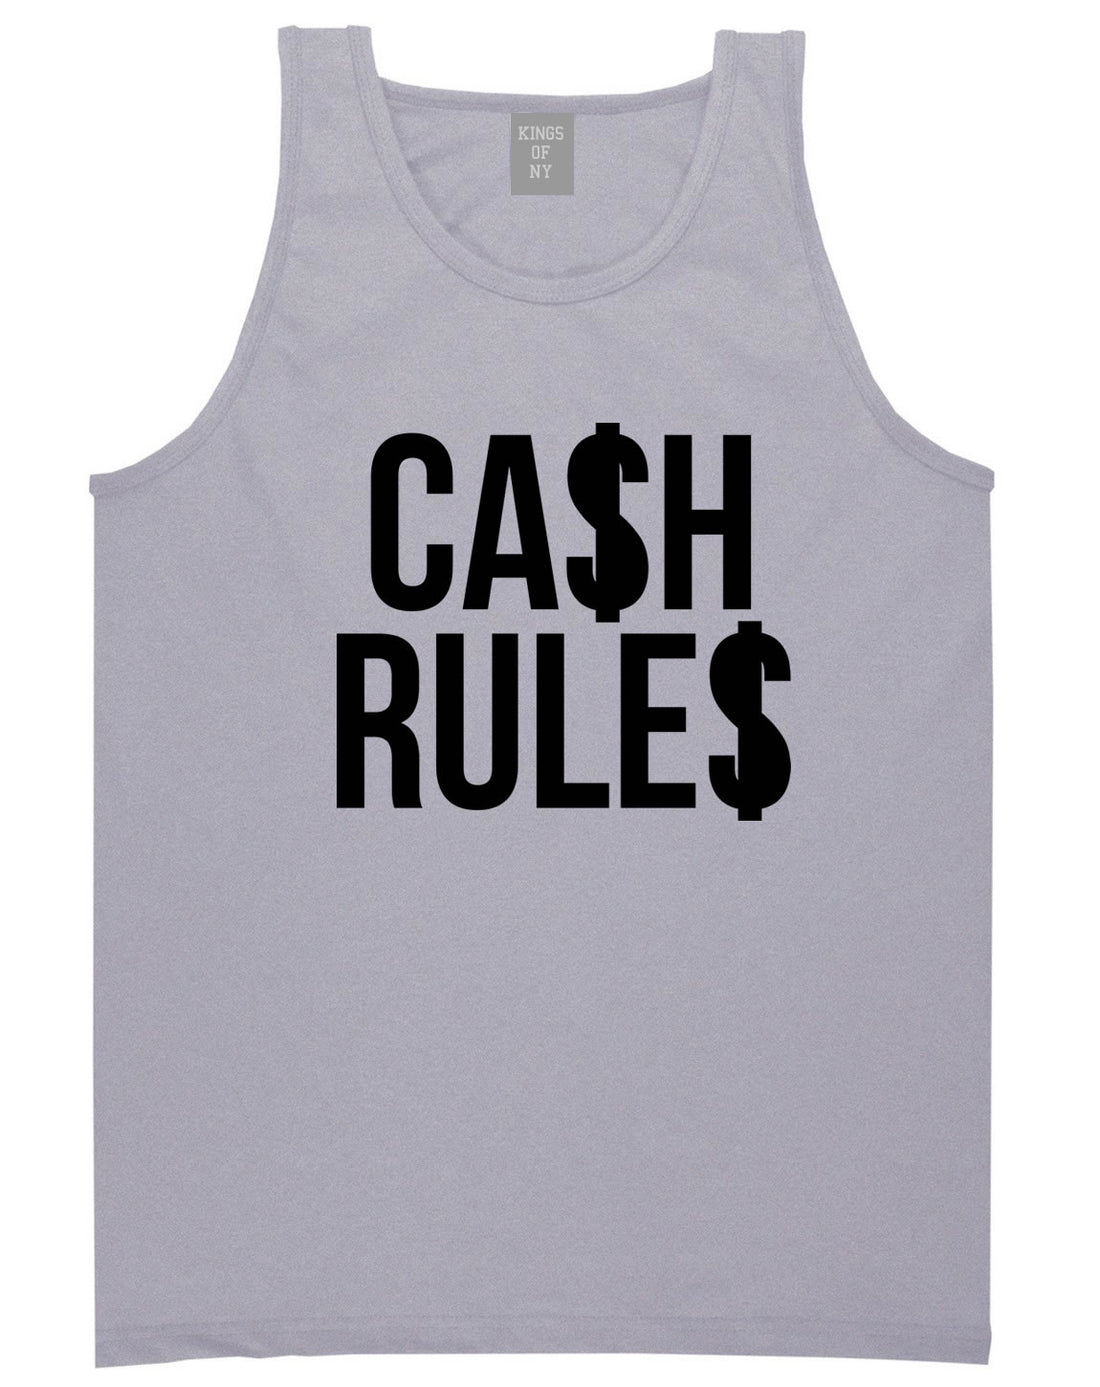 Cash Rules Tank Top in Grey by Kings Of NY